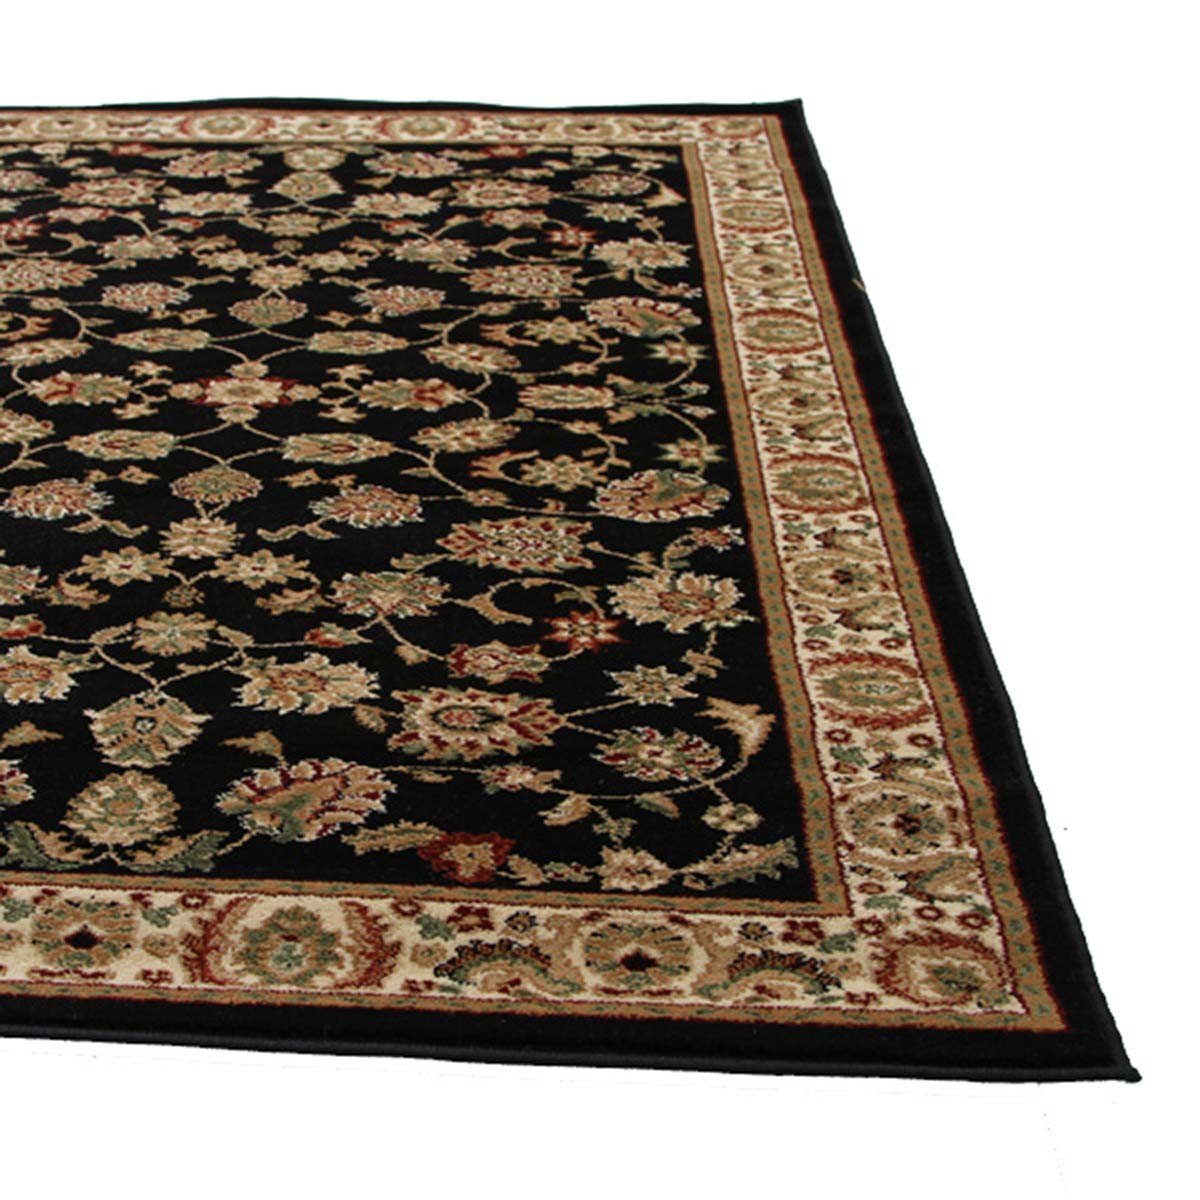 Istanbul Traditional Floral Pattern Runner Rug Black